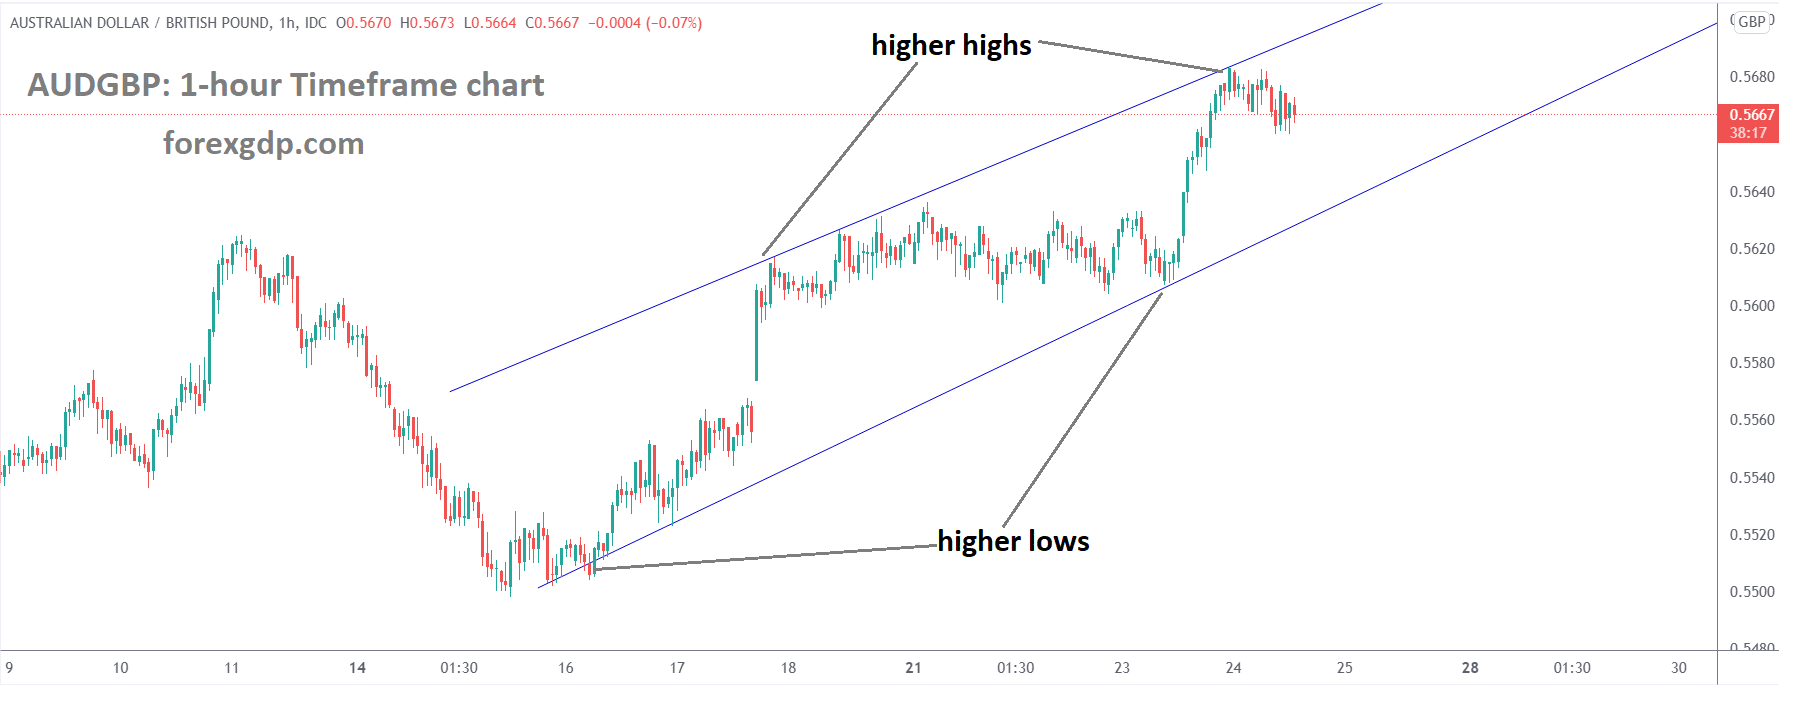 AUDGBP H1 Market is moving in the Rising Wedge Pattern and Falling from the higher high area of the Wedge Pattern 1